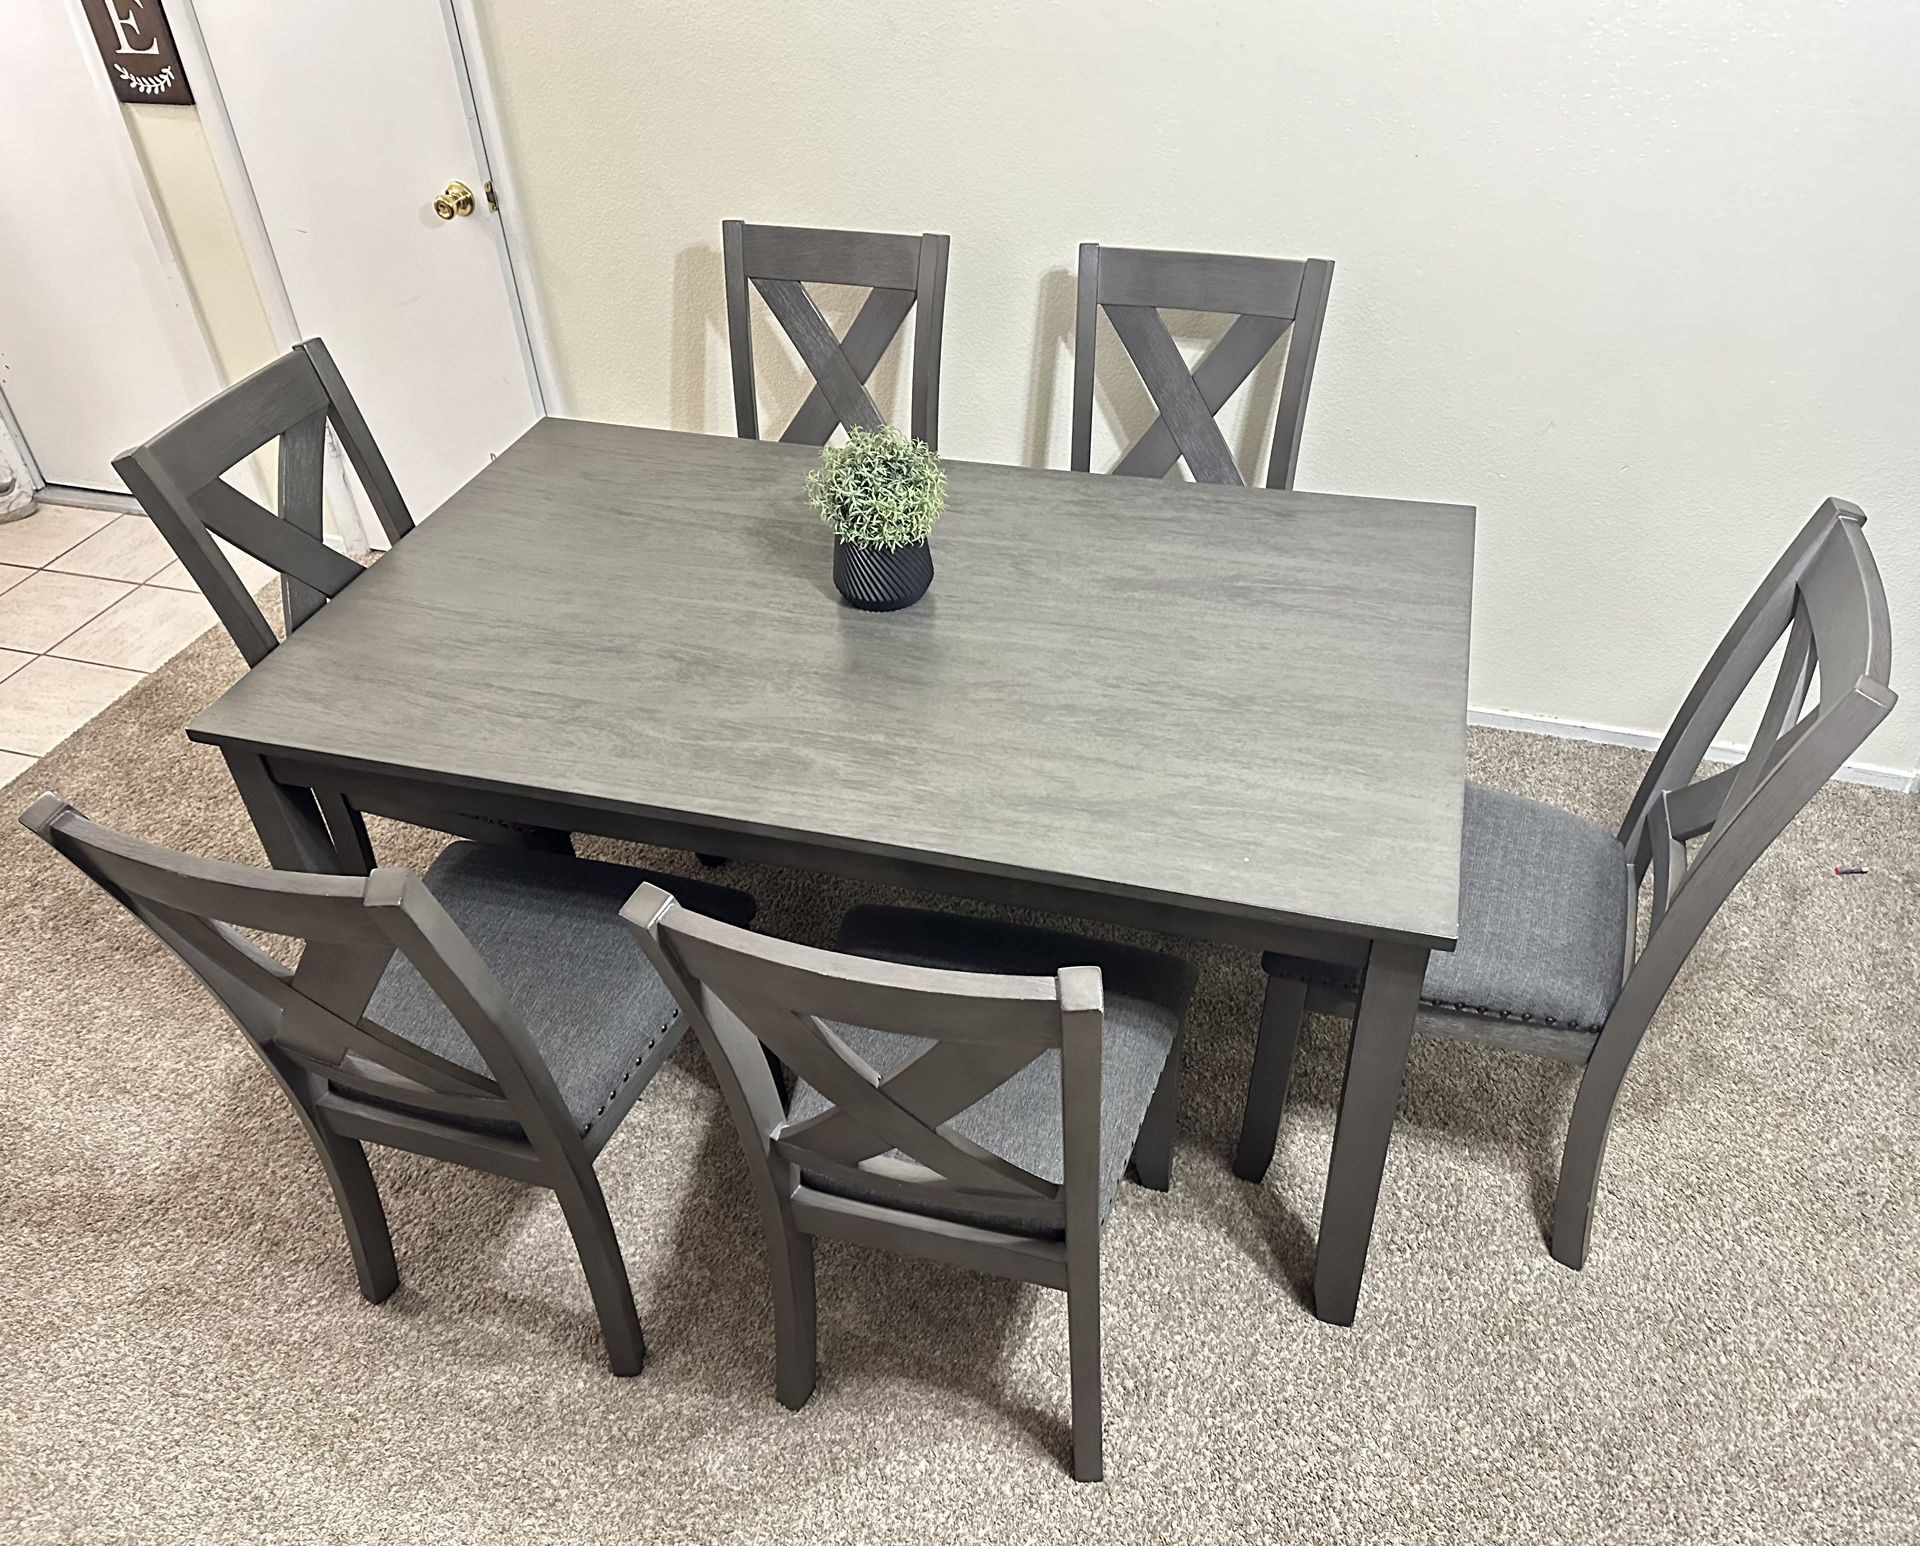 Dining Table and 6 Chairs Set From Ashley Furniture/Check My Offers😉